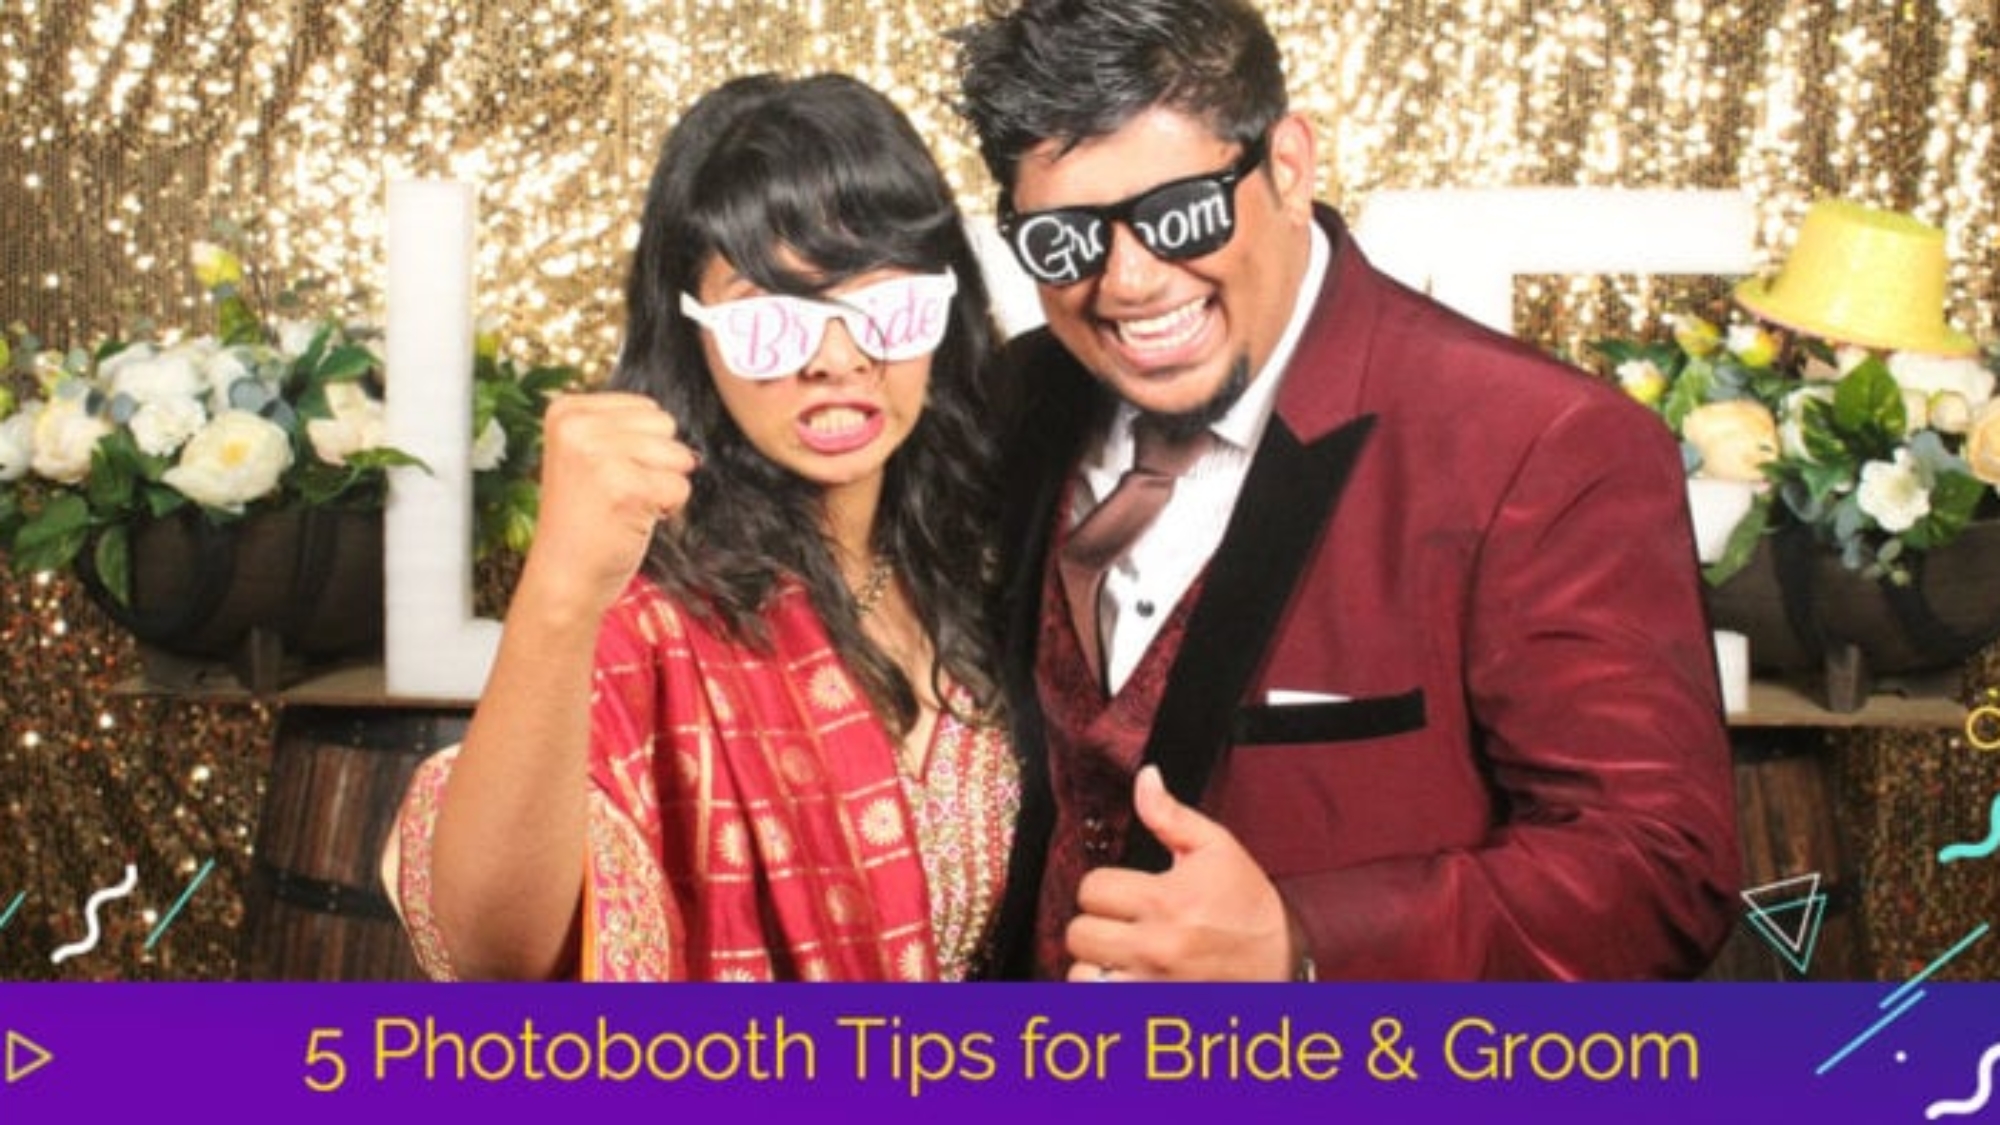 5 photobooth tips for bride & groom